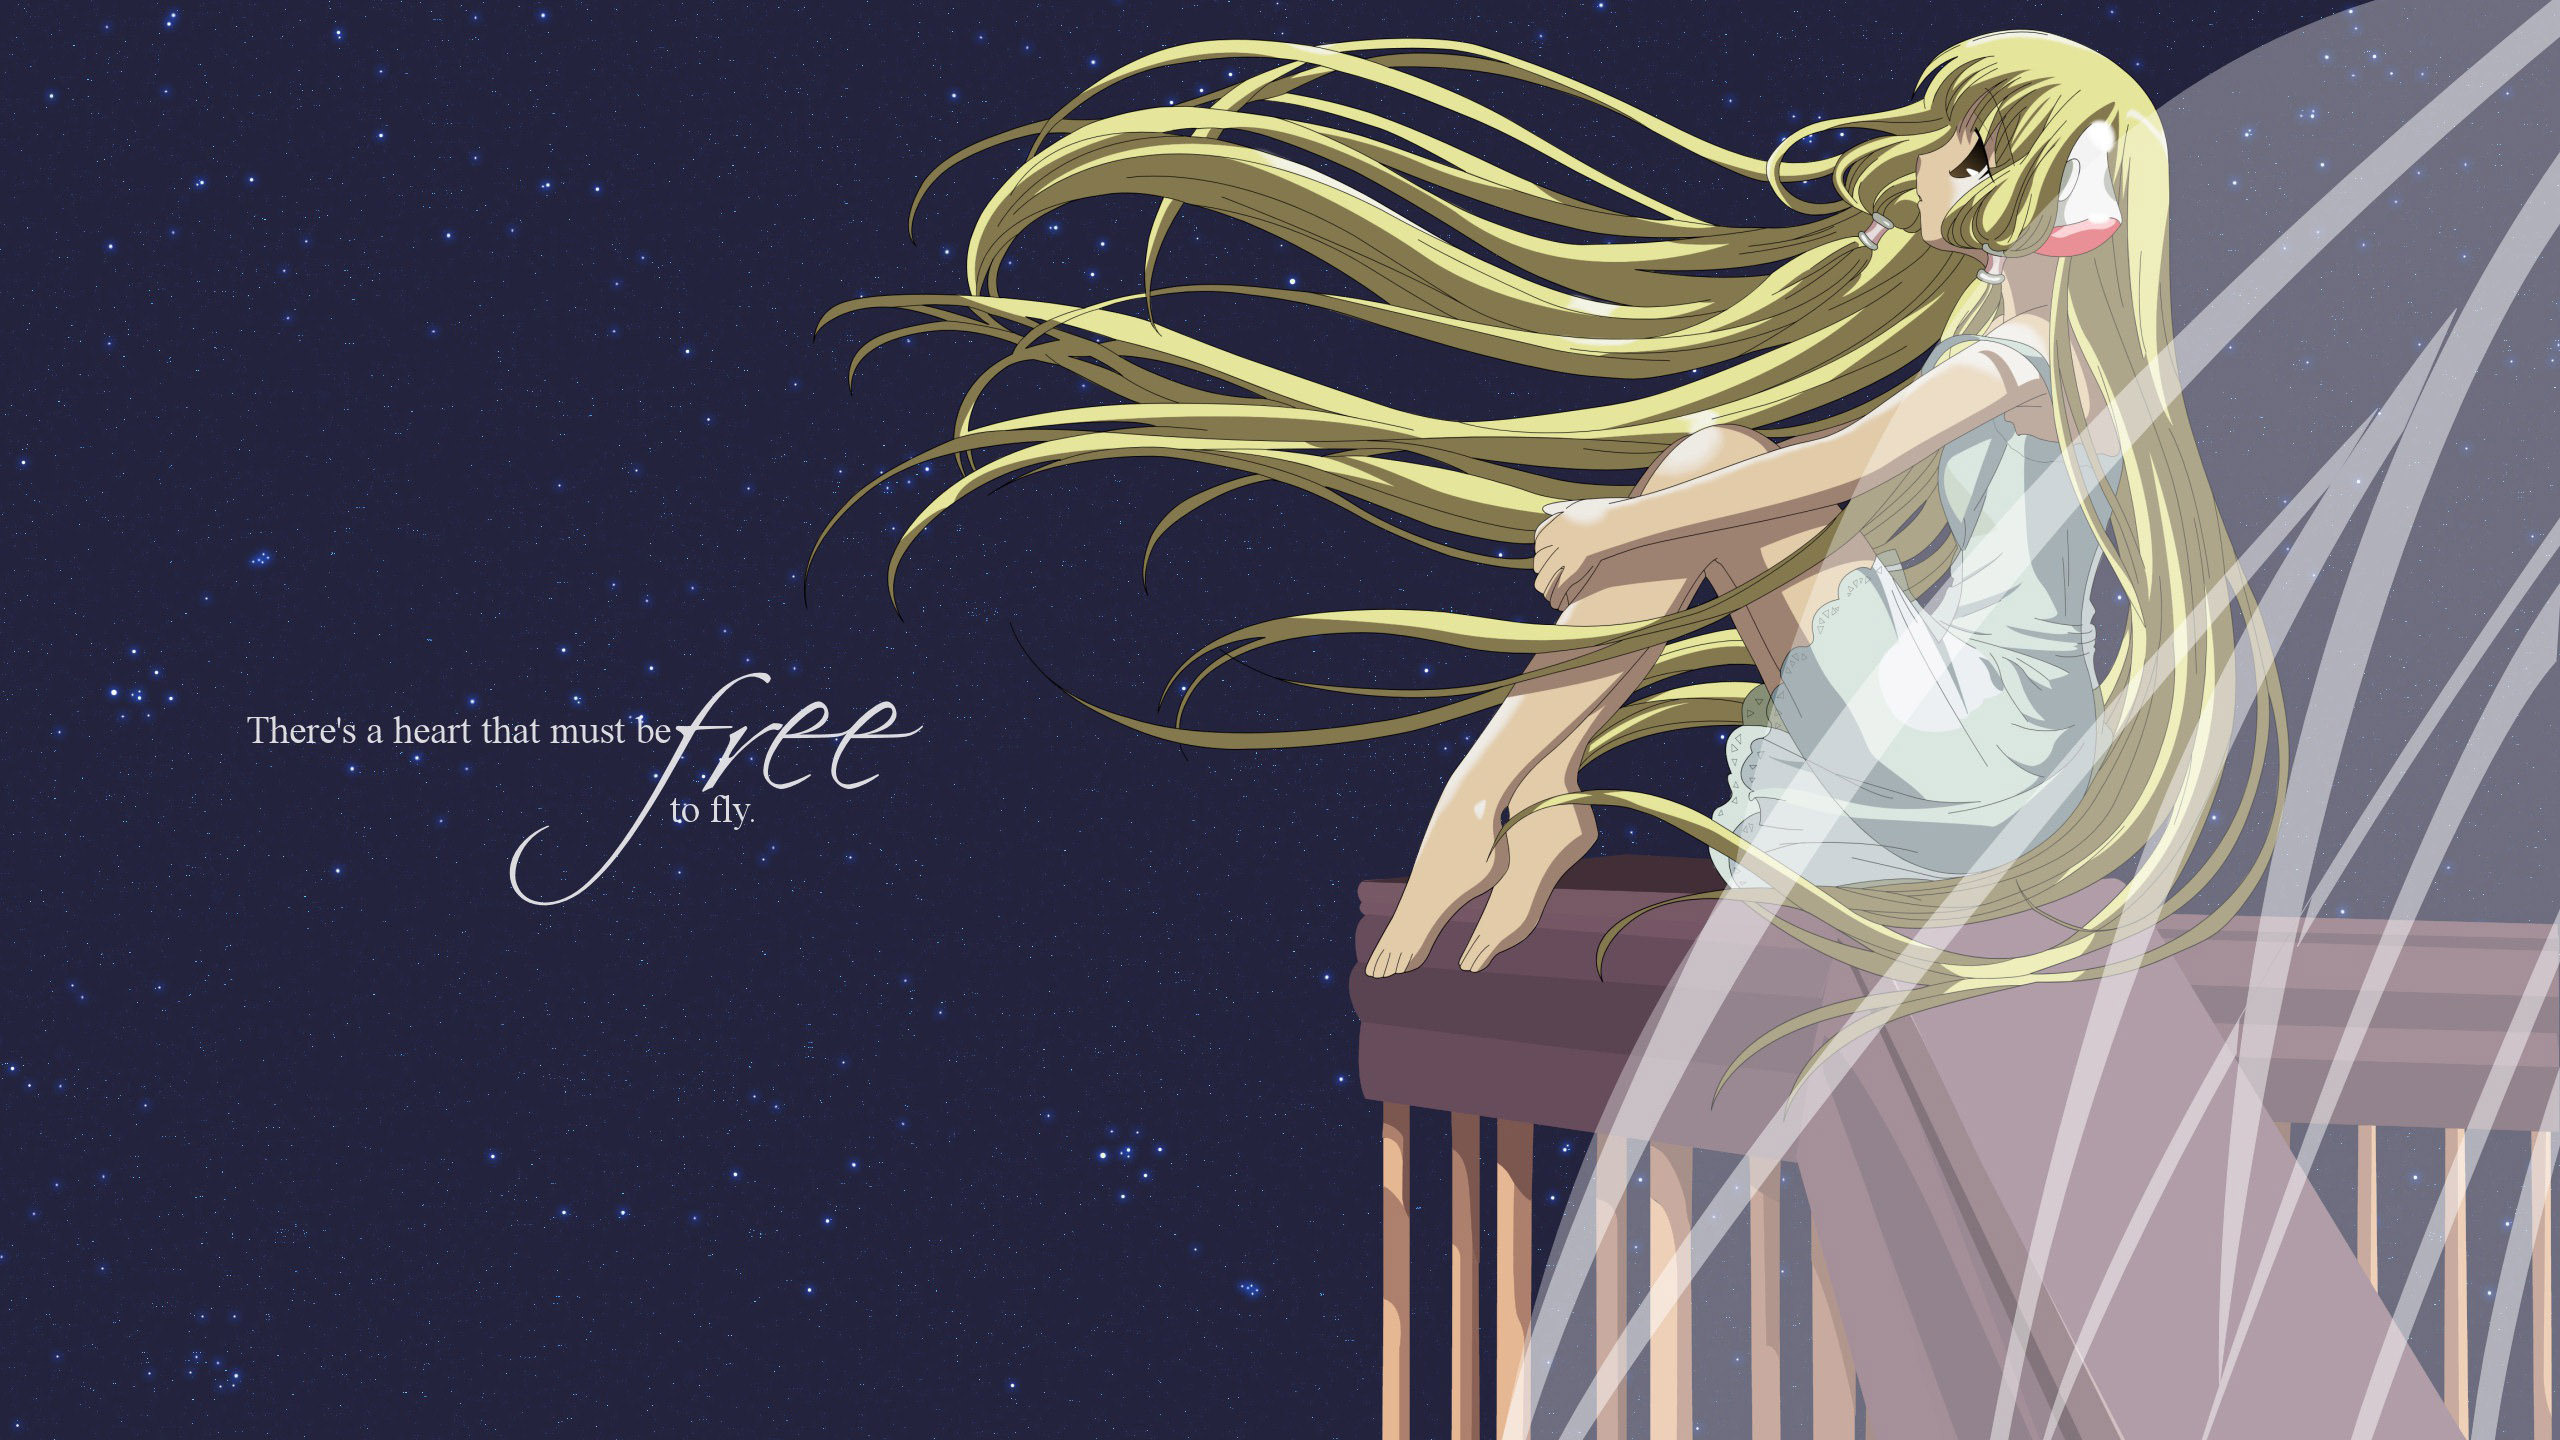 Image Chobits Wallpaper Chii Pc Android iPhone And iPad